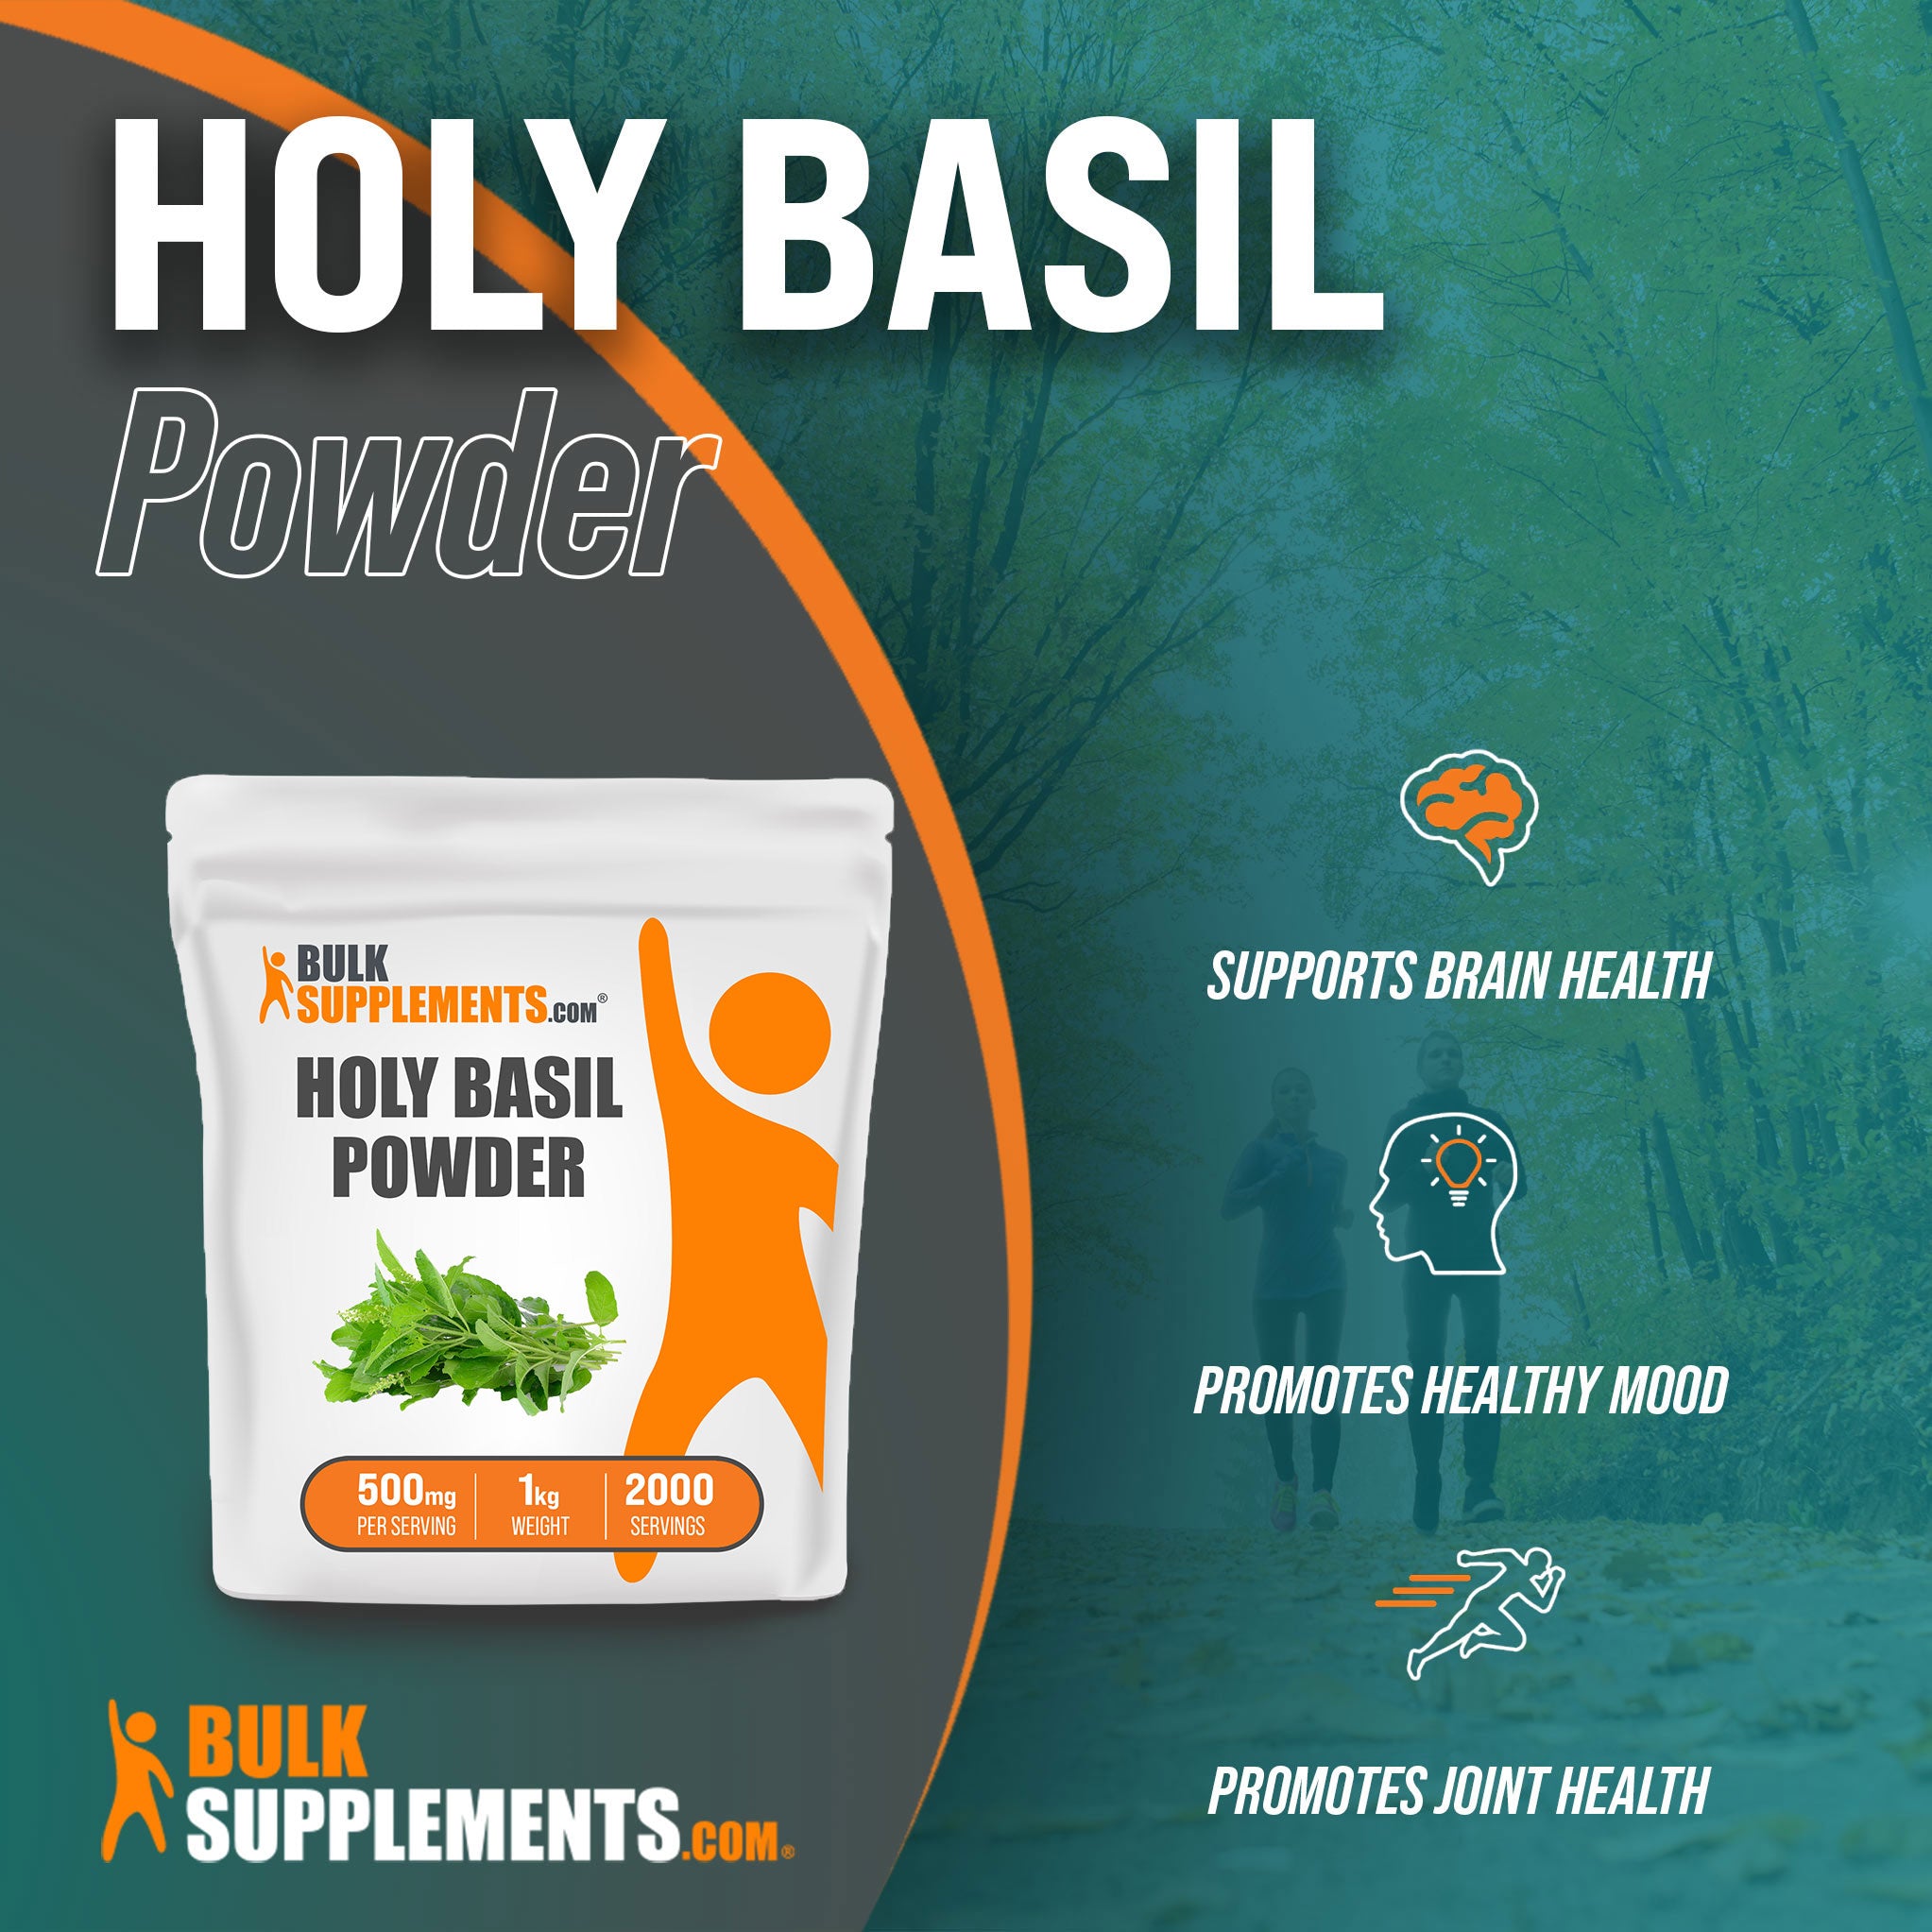 Benefits of Holy Basil Powder; supports brain health, promotes healthy mood, promotes joint health